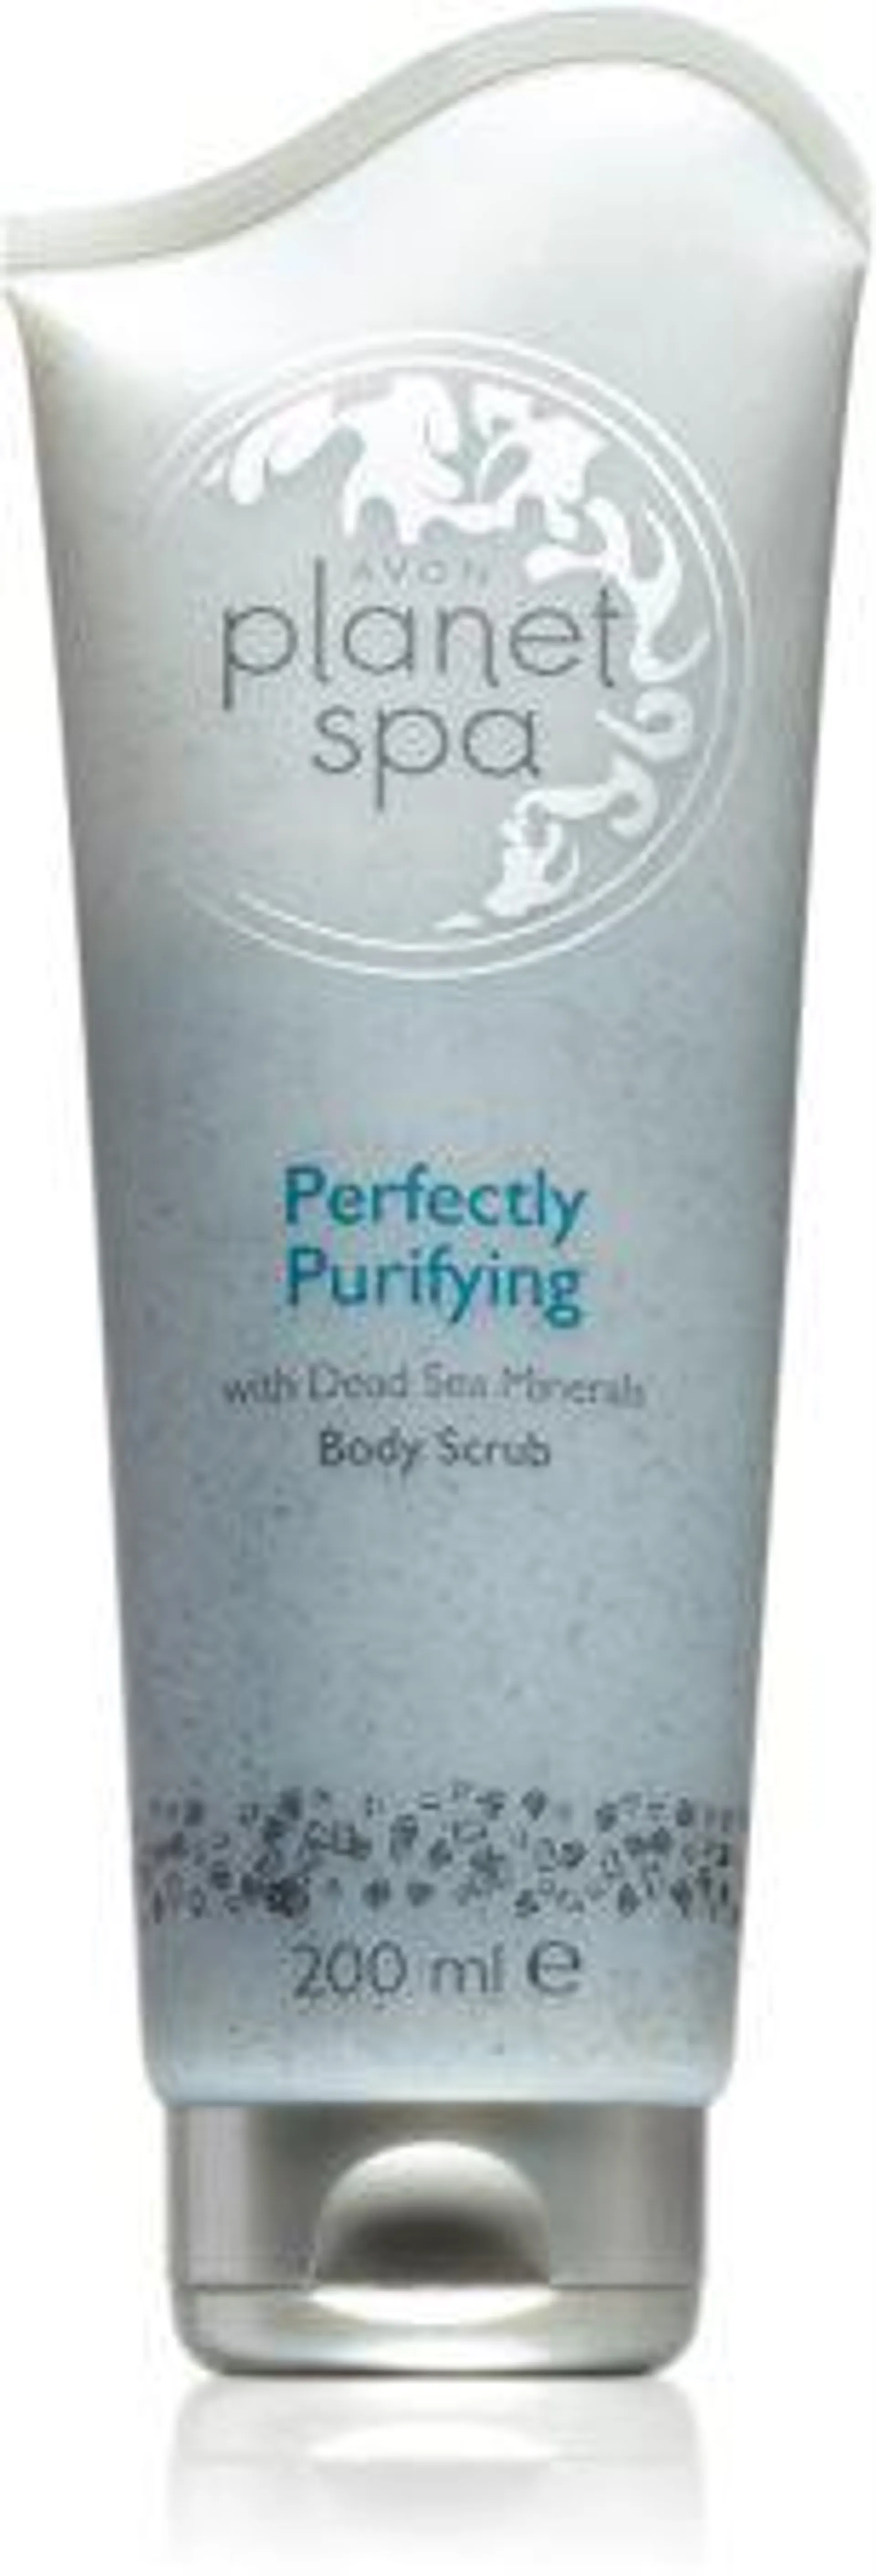 Planet Spa Perfectly Purifying